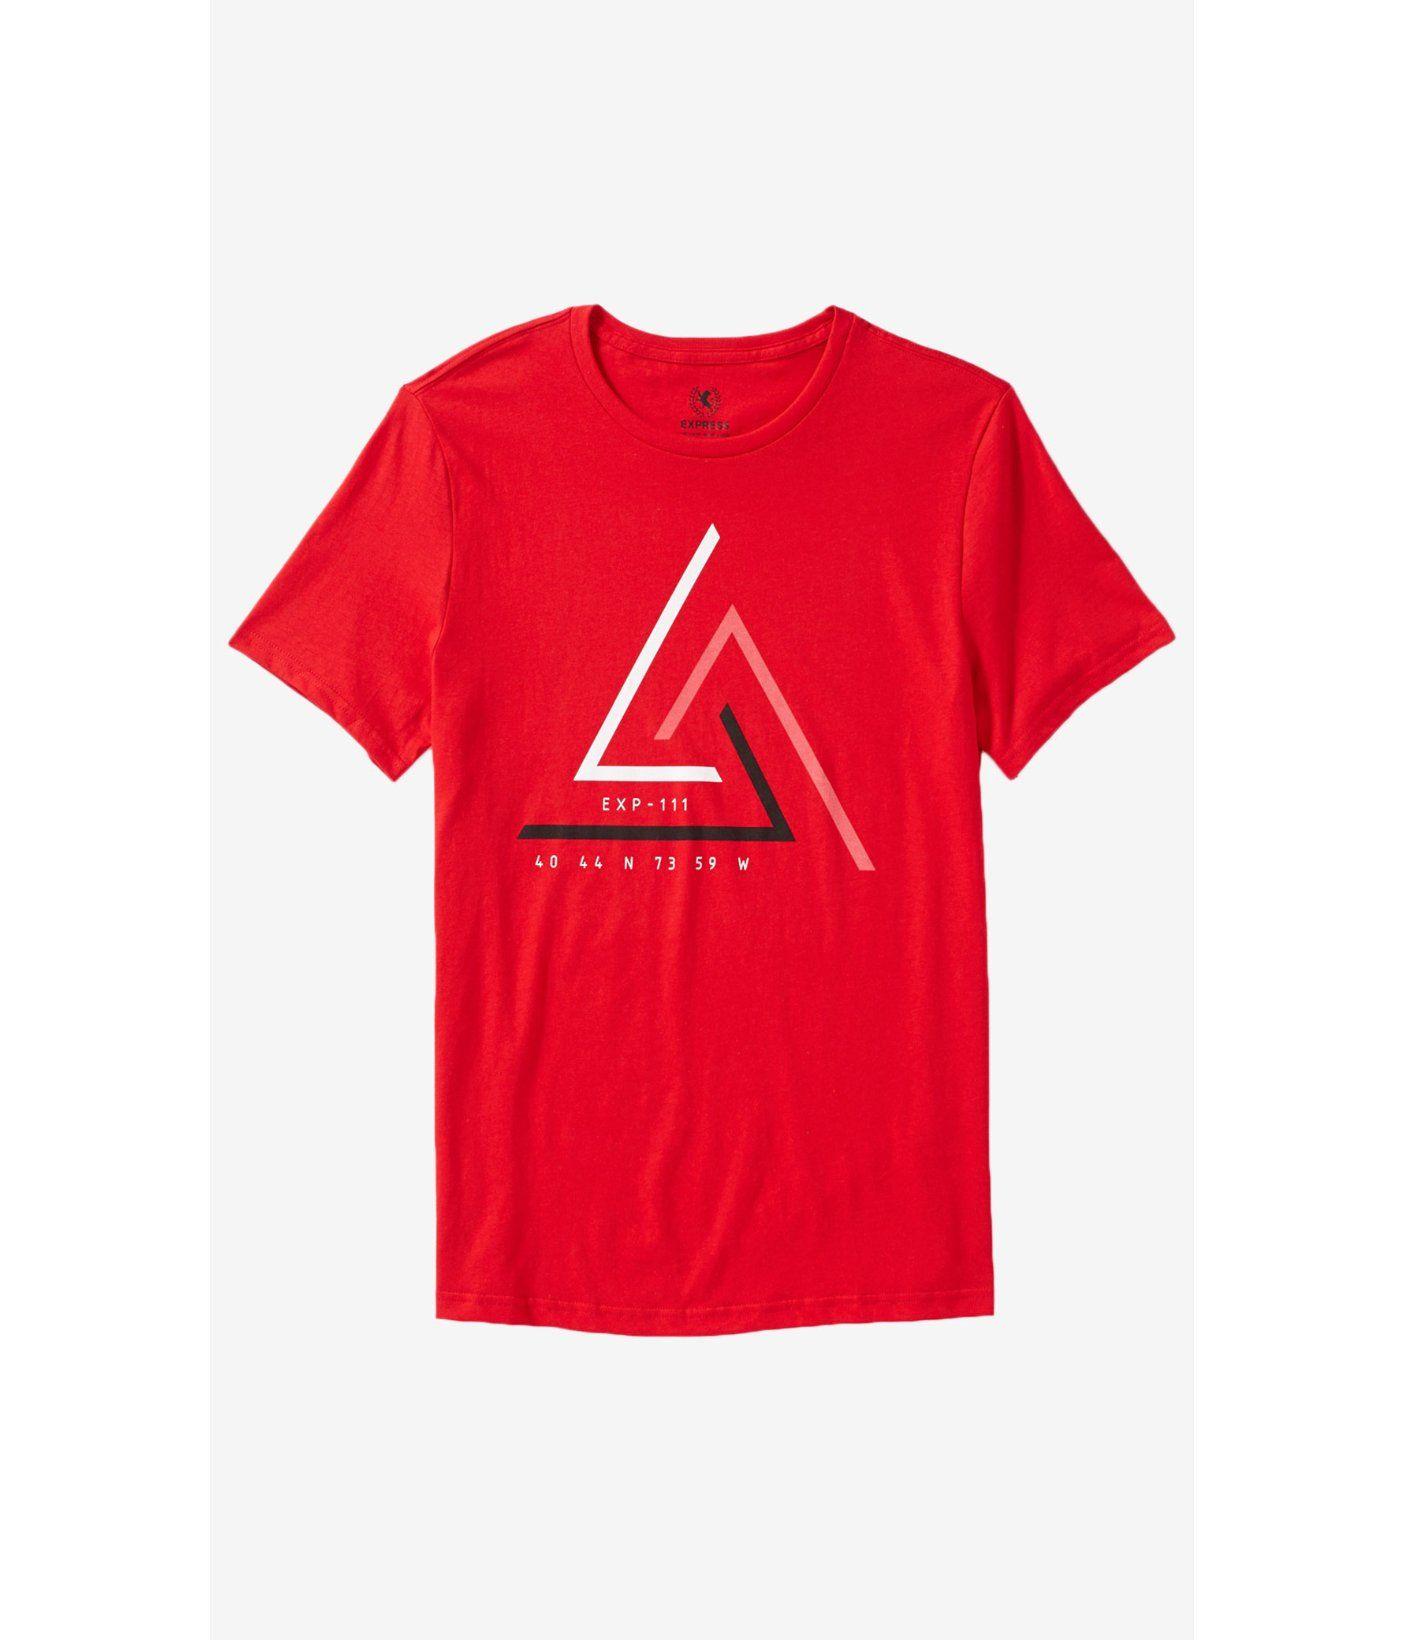 Red Triangle Clothing Logo - Express Triangle Bars Graphic Tee in Red for Men - Lyst